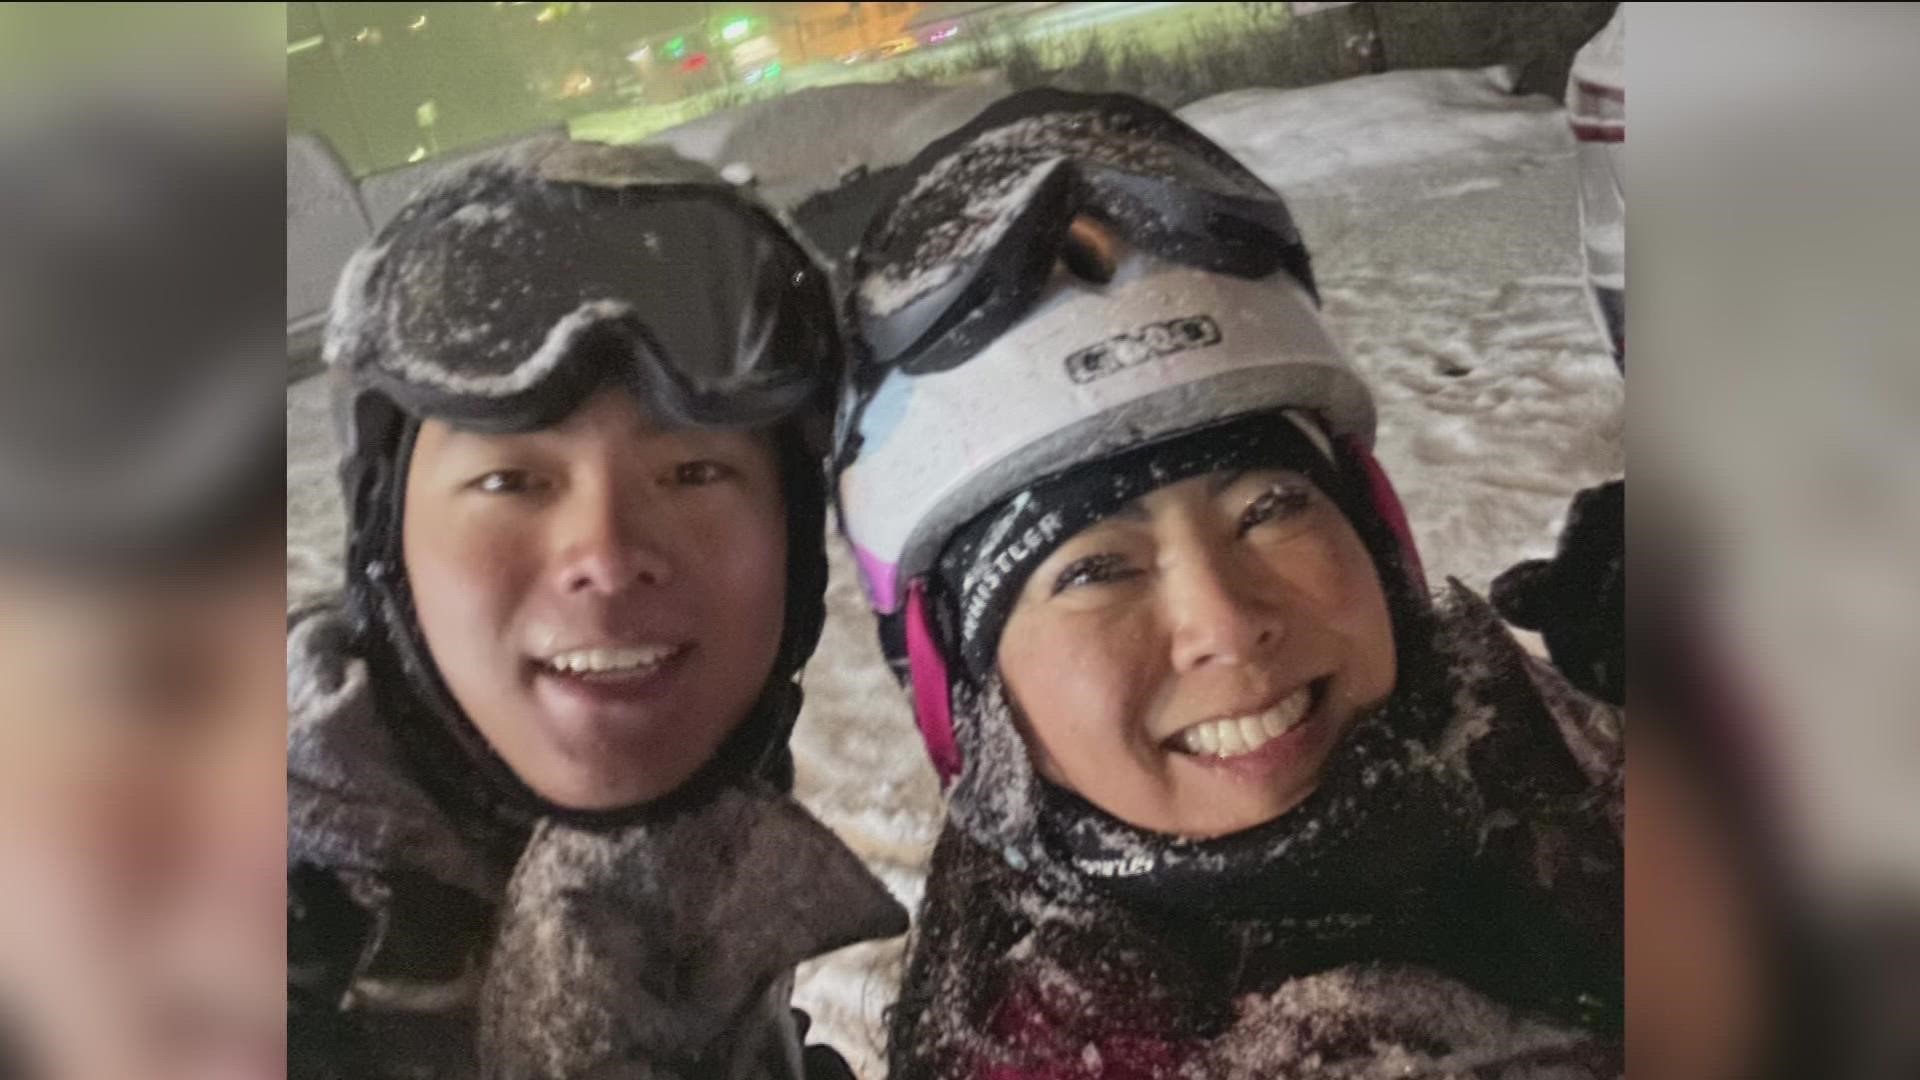 CBS 8 anchor Marcella Lee shares what happened to her son during a family ski trip in Denver, in case you and your family ever experience a similar situation.